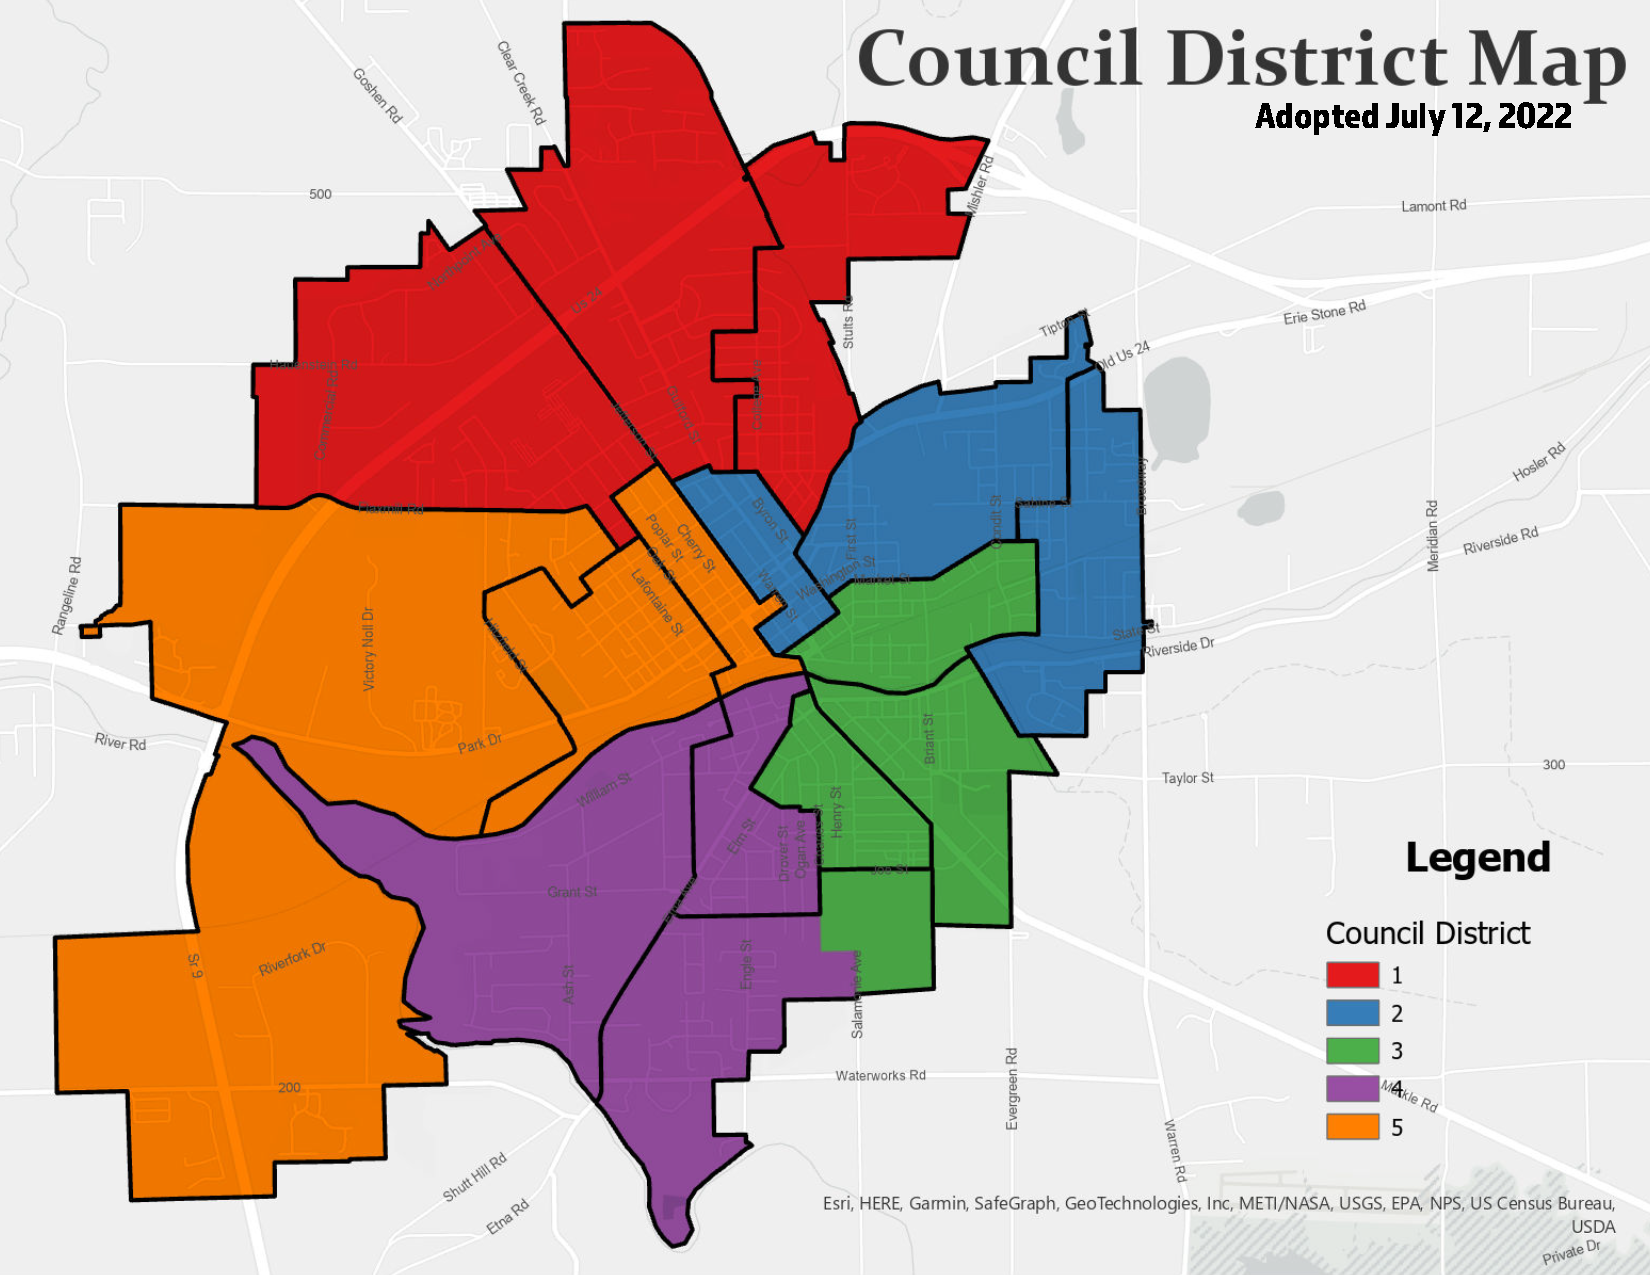 City Council Districts - Adopted July 12, 2022